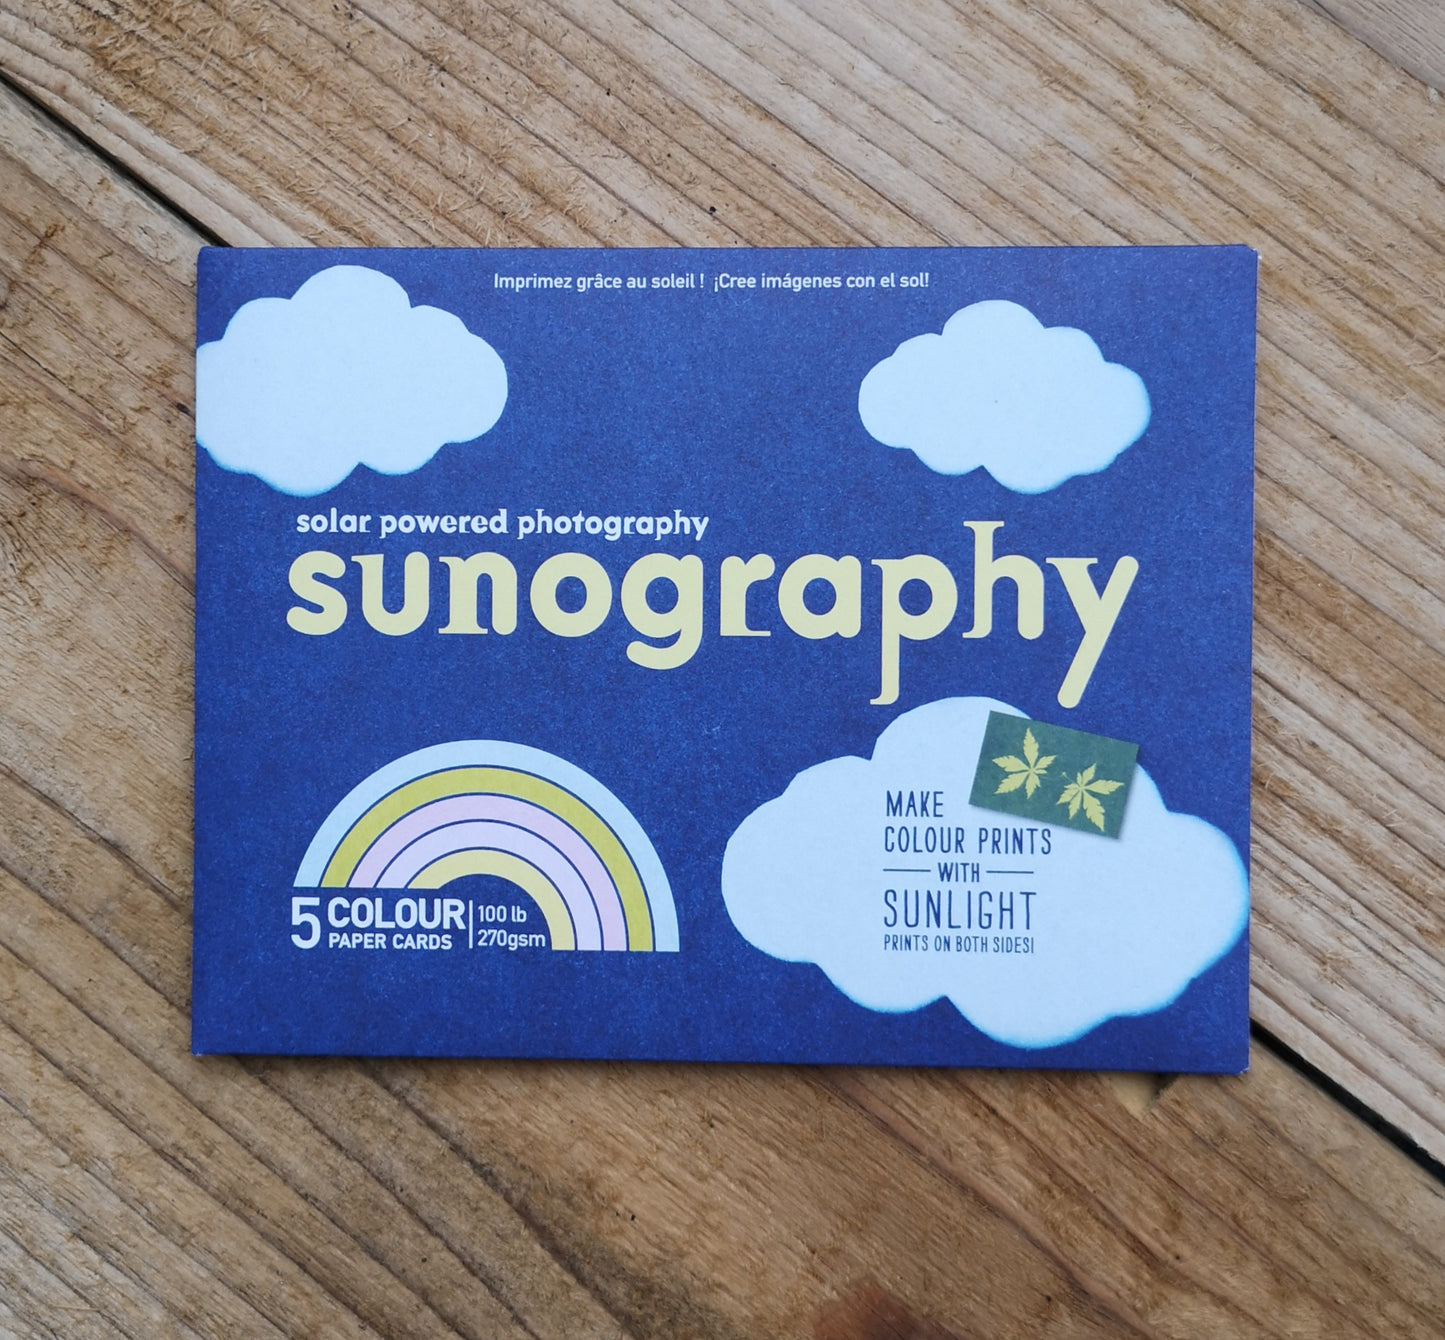 5 colour sunography cards